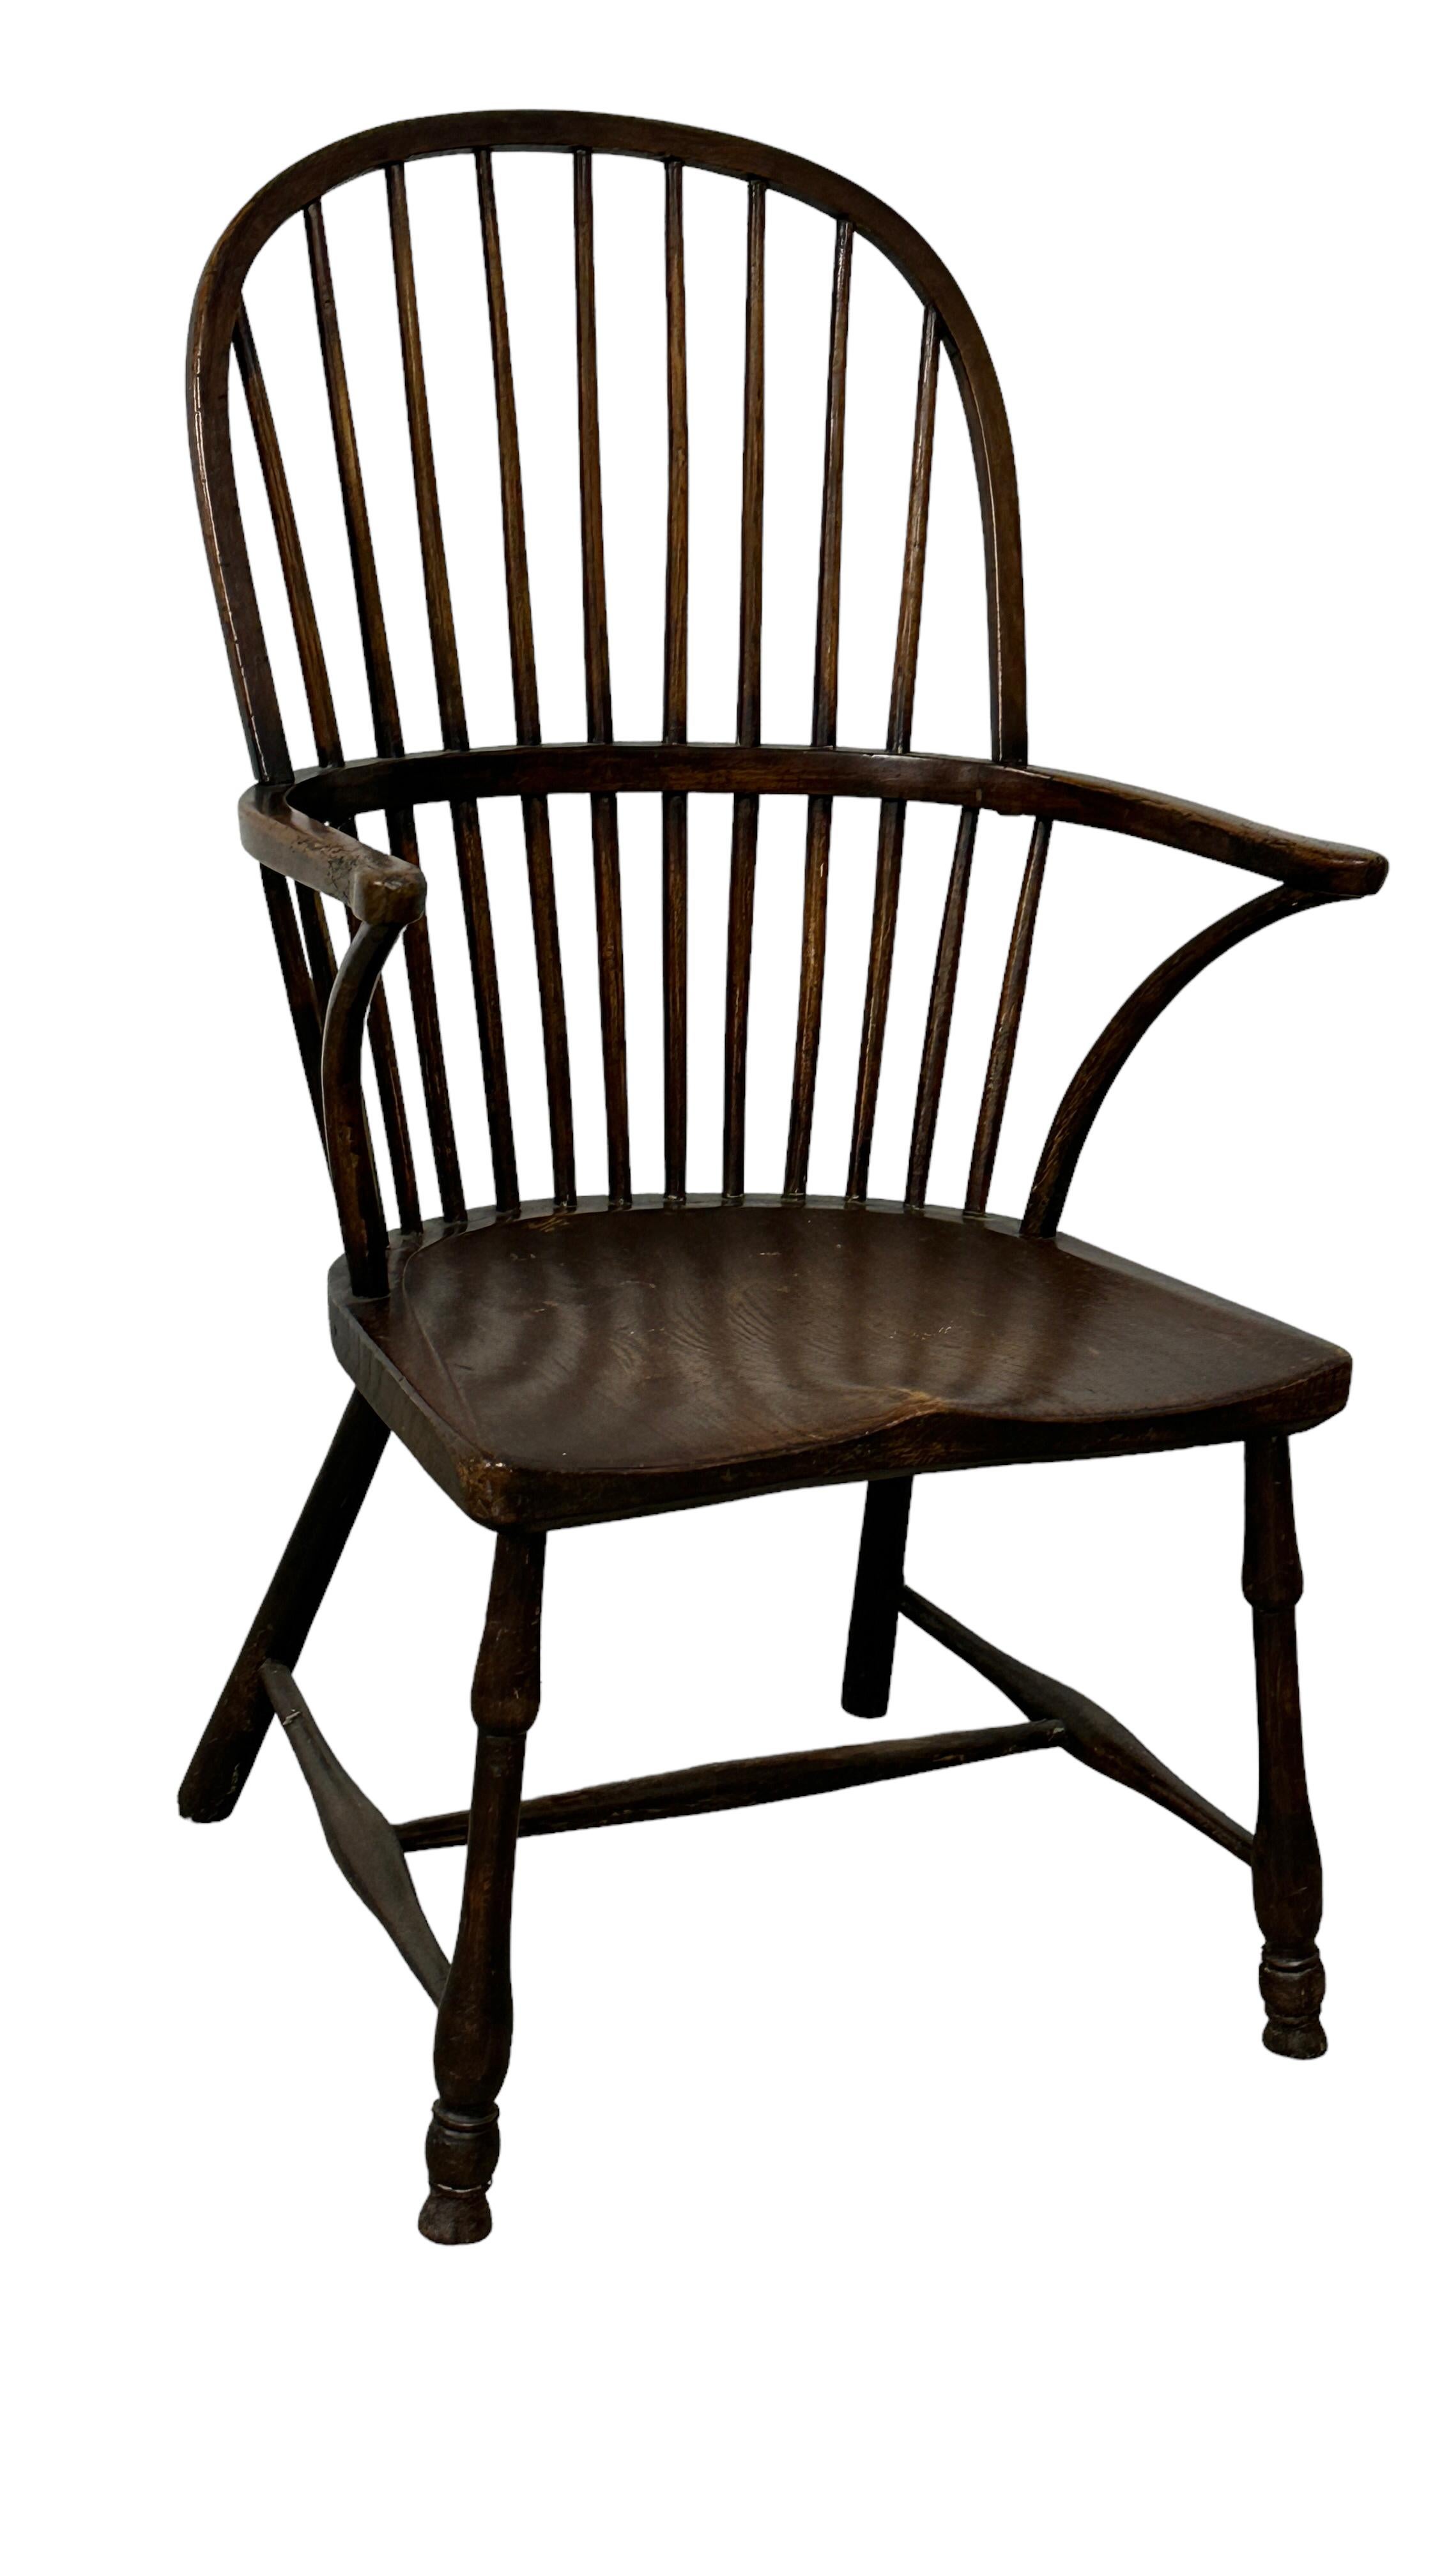 Beautiful Antique Windsor Wooden Chair, 19th Century, England 11